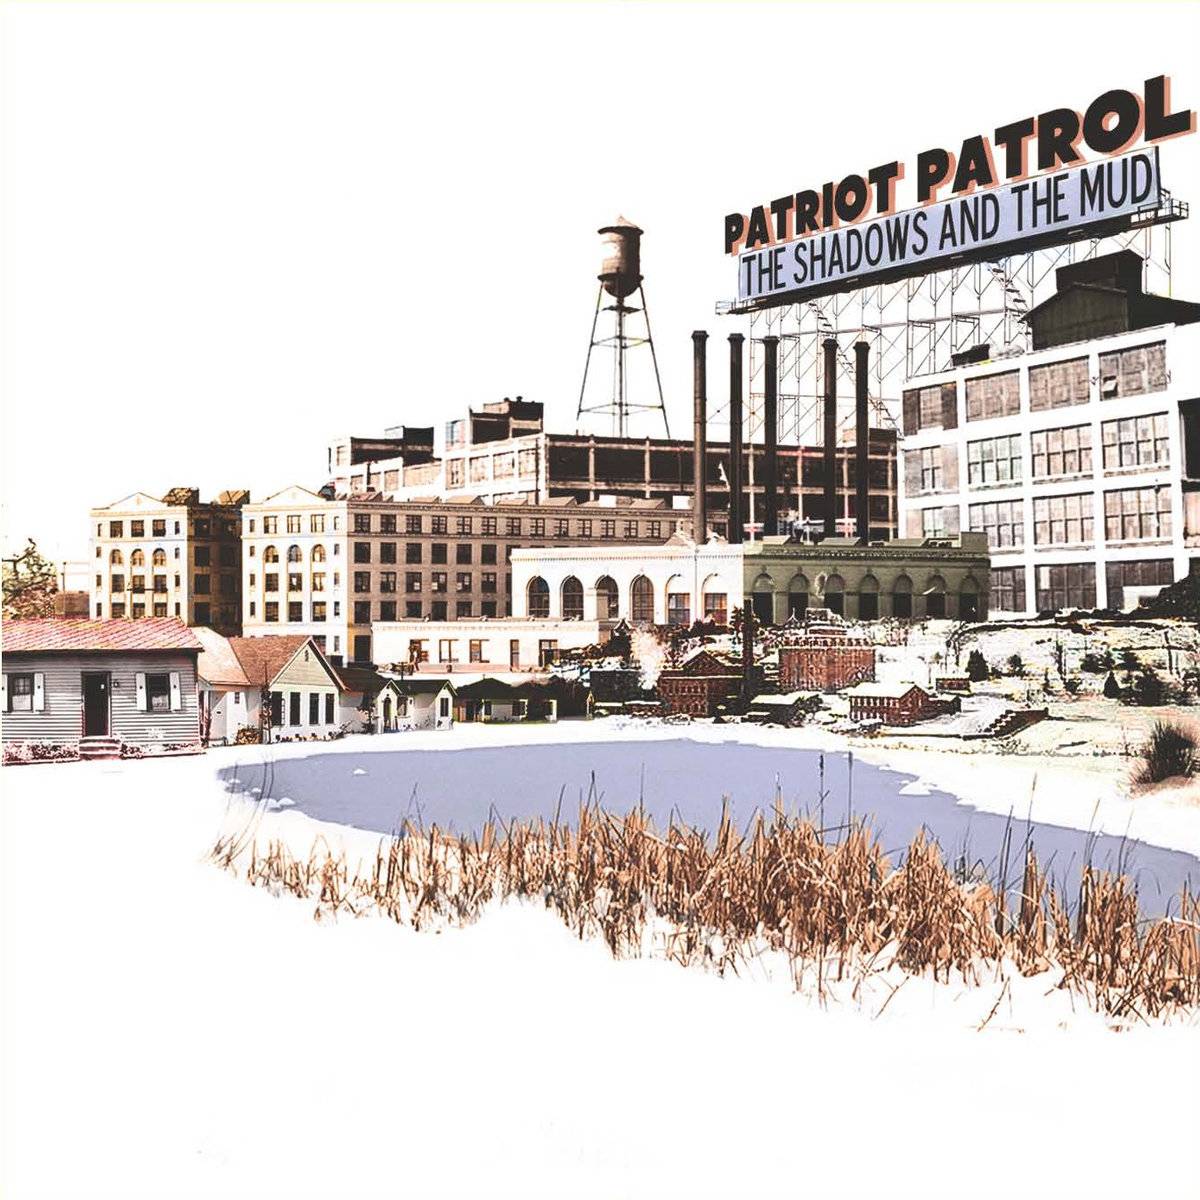 New music from local pop/rock band Patriot Patrol